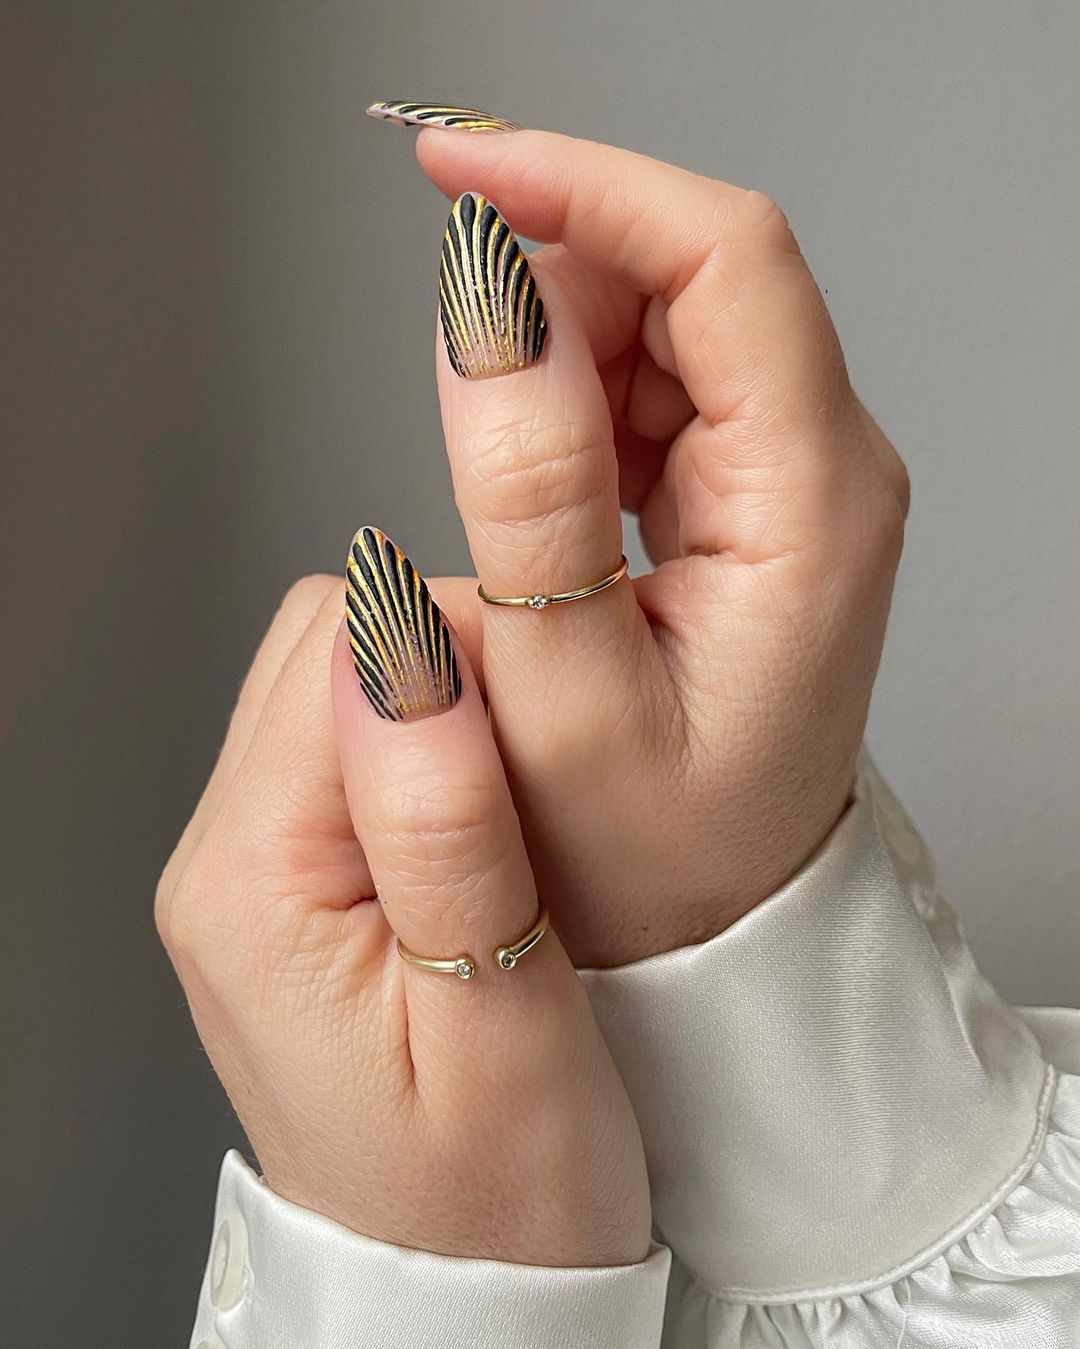 Butterfly Nails Is the Manicure Trend of Summer 2022 — See Photos | Allure